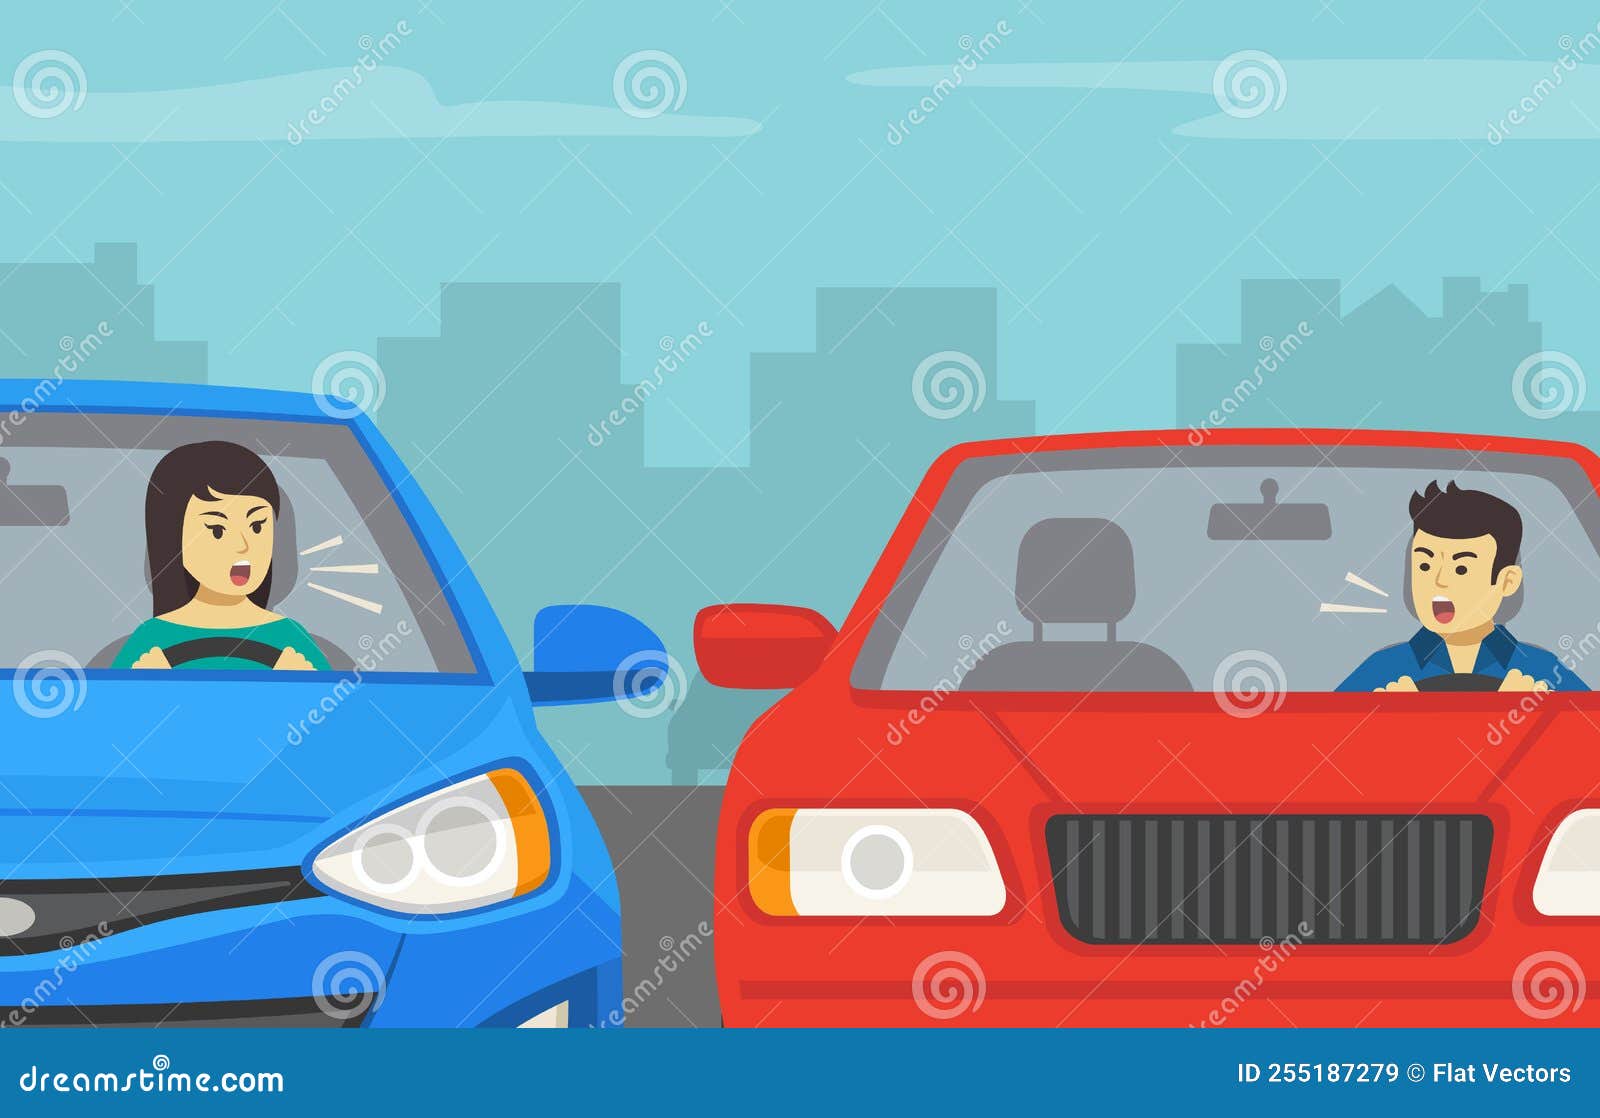 front view of a yelling characters. road rage between male driver and female driver.